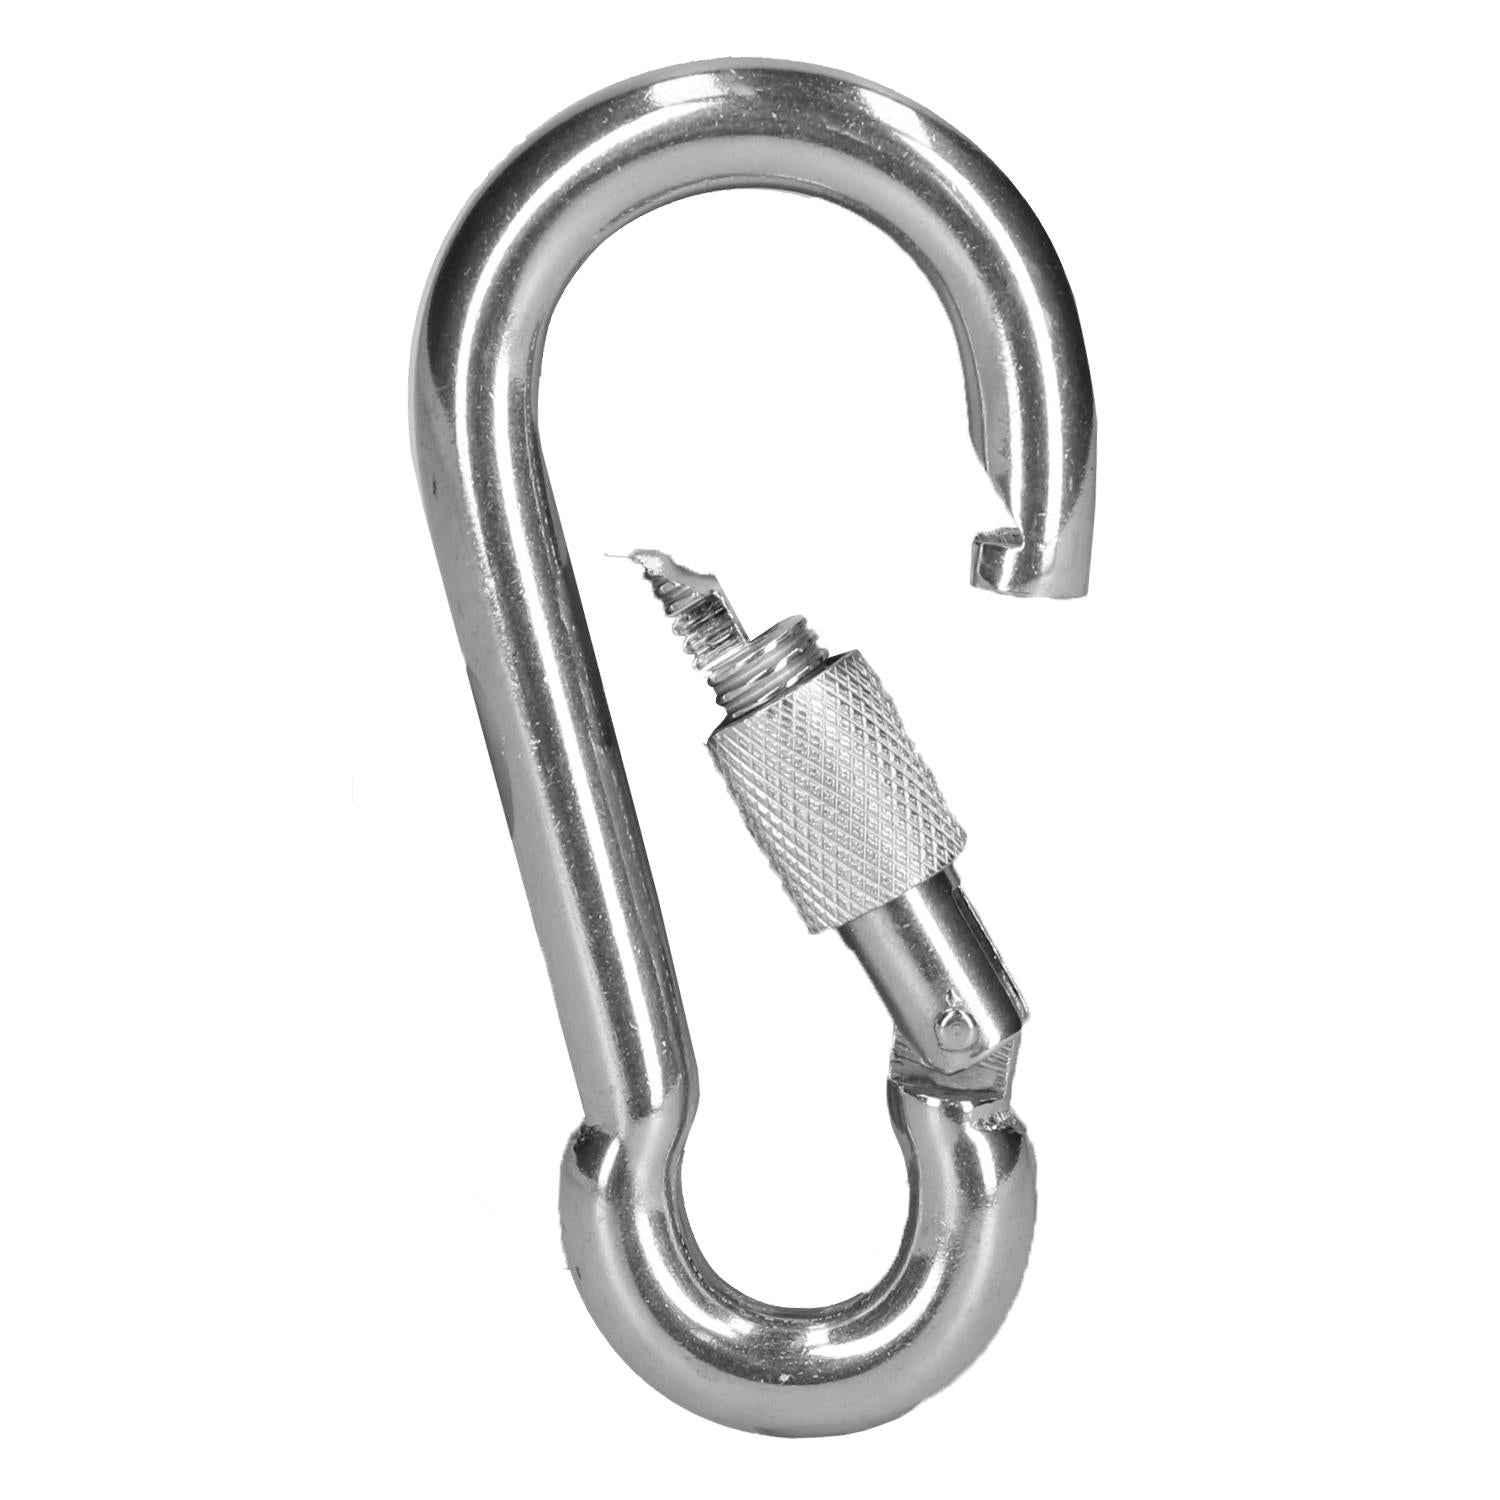 Carabiner Carbine Hook with Screw Gate 10mm MARINE GRADE Stainless Steel